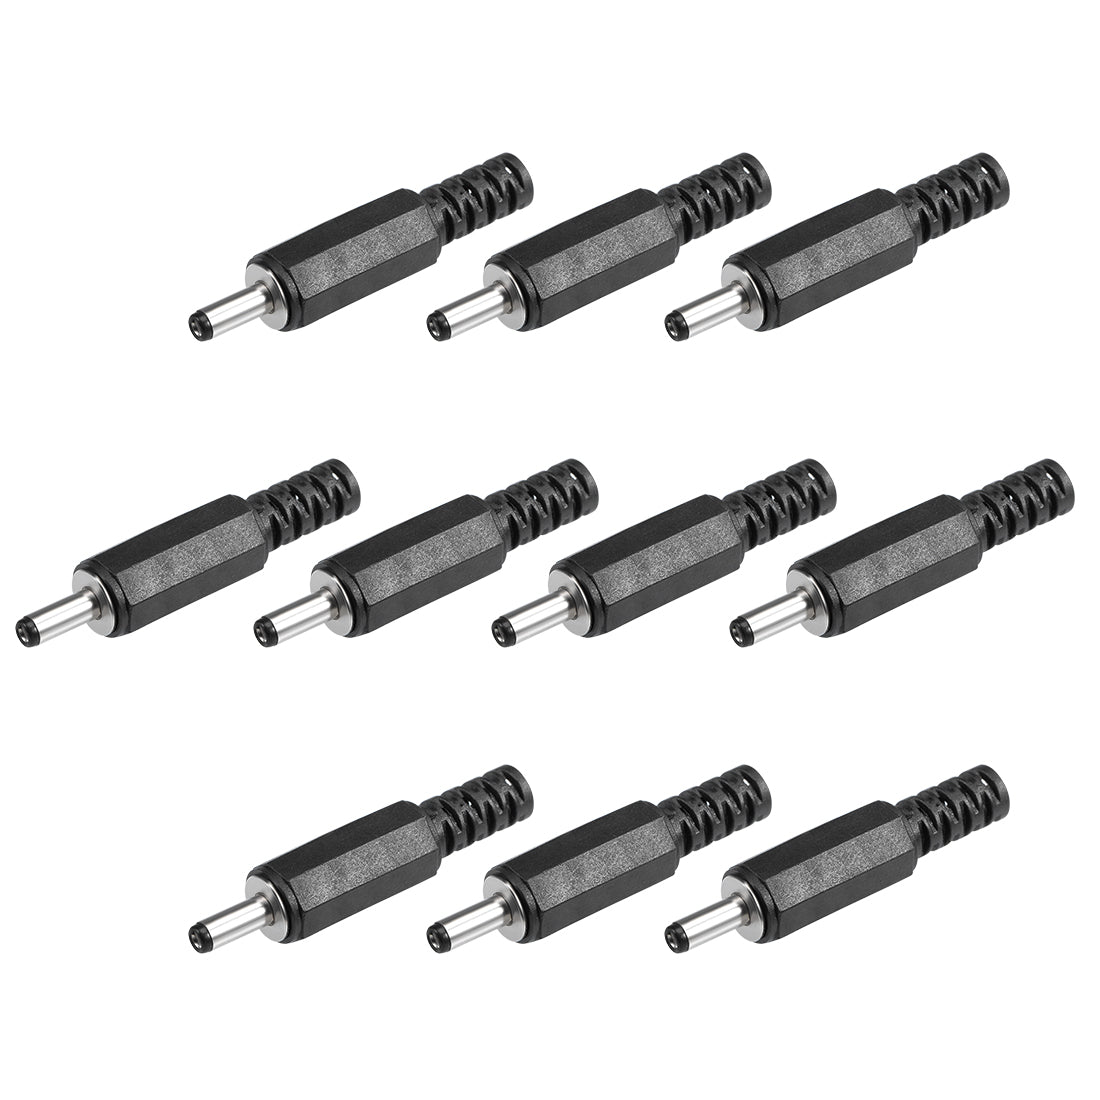 uxcell Uxcell 10Pcs DC Male Connector 3.5mm x 1.1mm Power Cable Jack Adapter Black